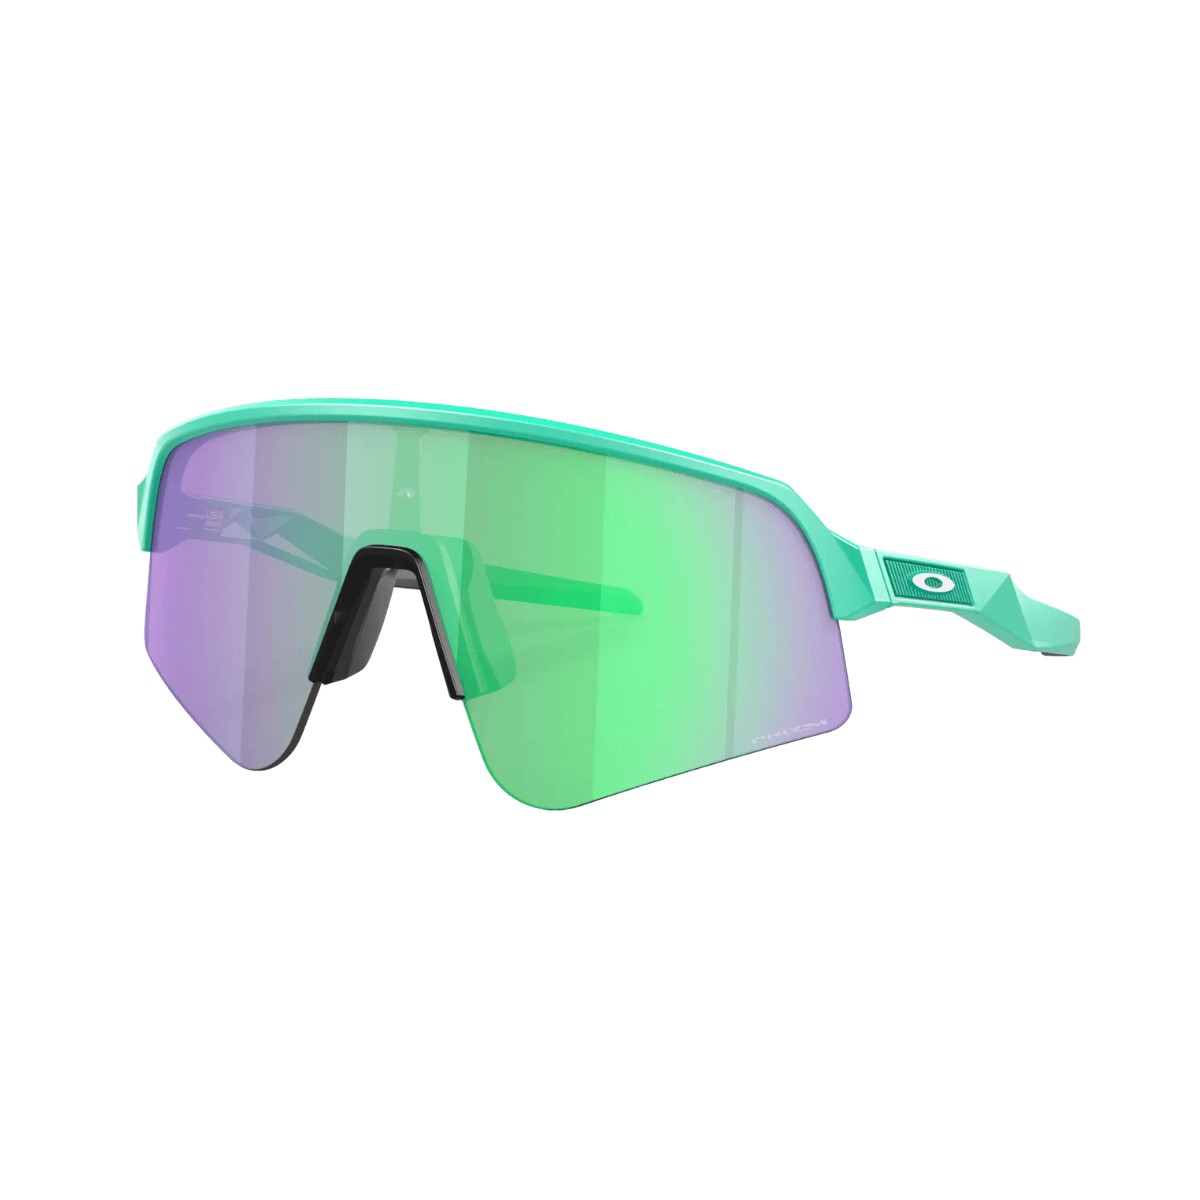 Buy Oakley Sutro Lite Sweep Green Purple Glasses at the best price